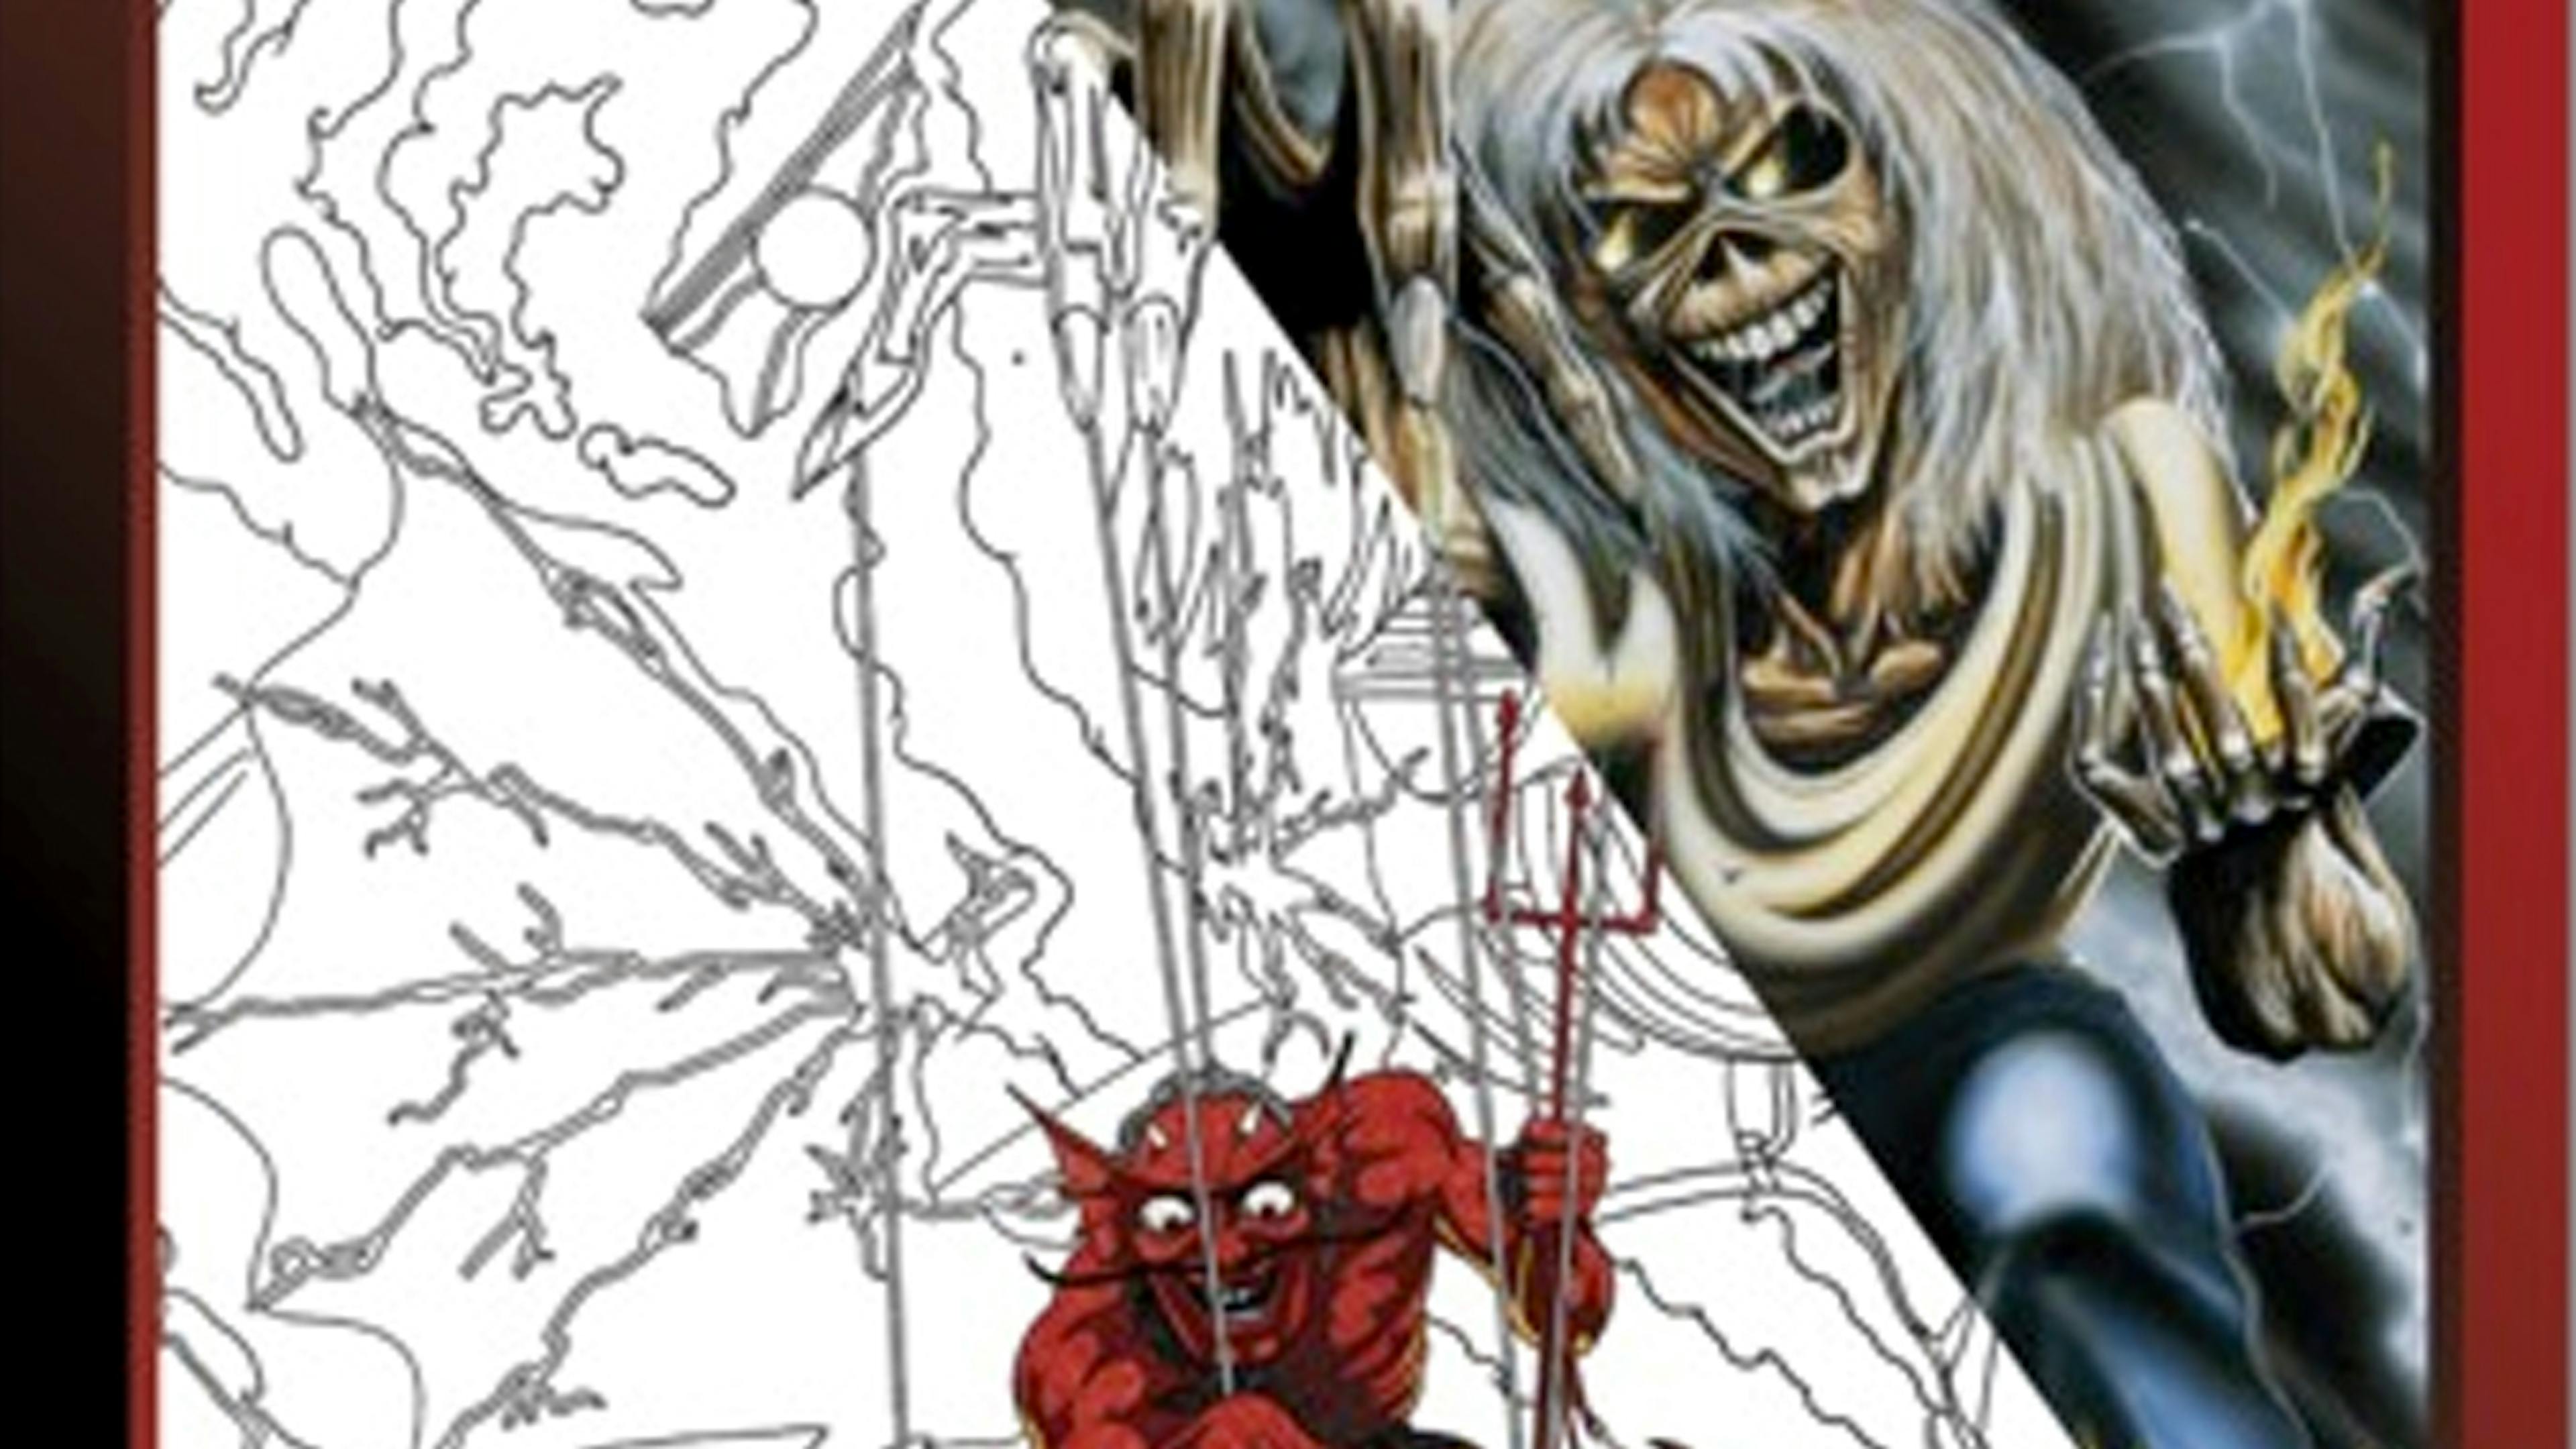 Awesome Iron Maiden merch alert: there's a killer colouring book coming